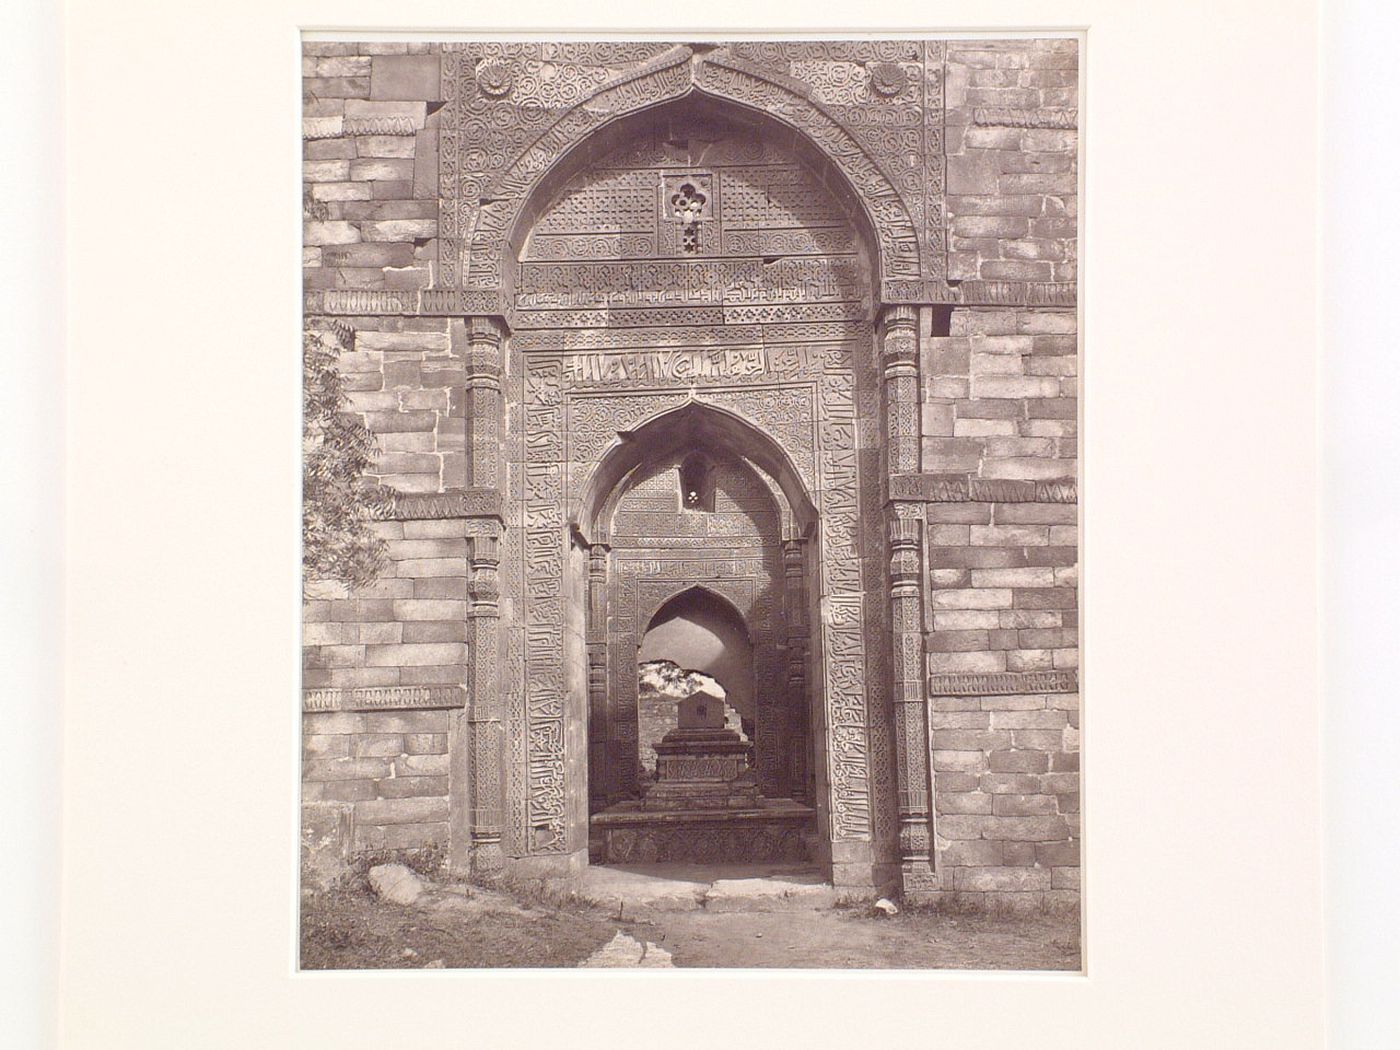 Partial view of the Tomb of Iltutmish showing an entrance and the cenotaph, Quwwat al-Islam [Might of Islam] Mosque Complex, Delhi, India